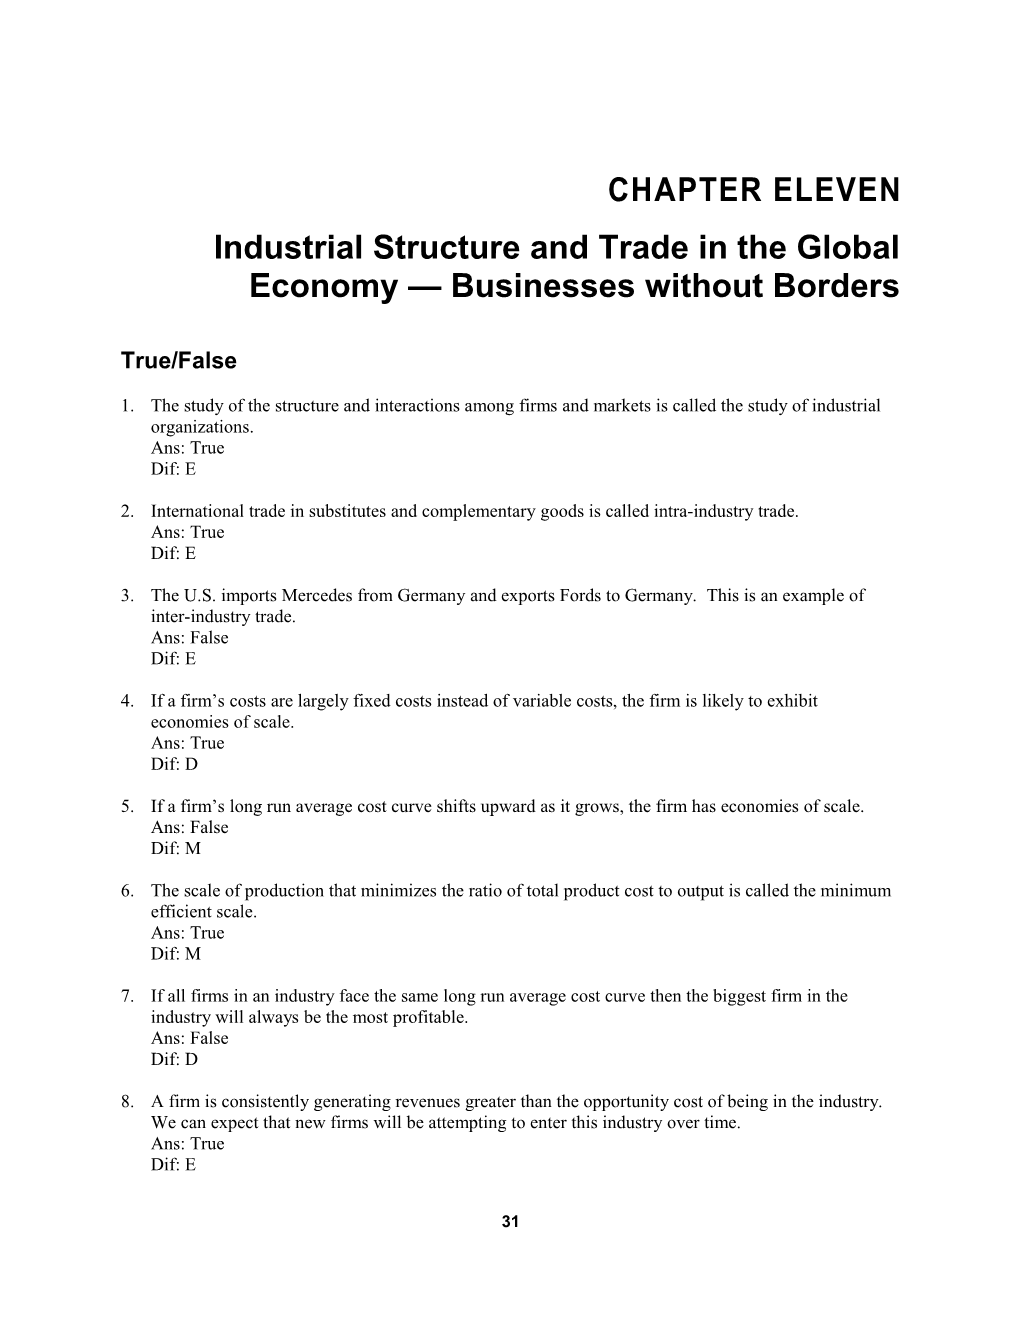 Industrial Structure and Trade in the Global Economy Business Without Borders 299